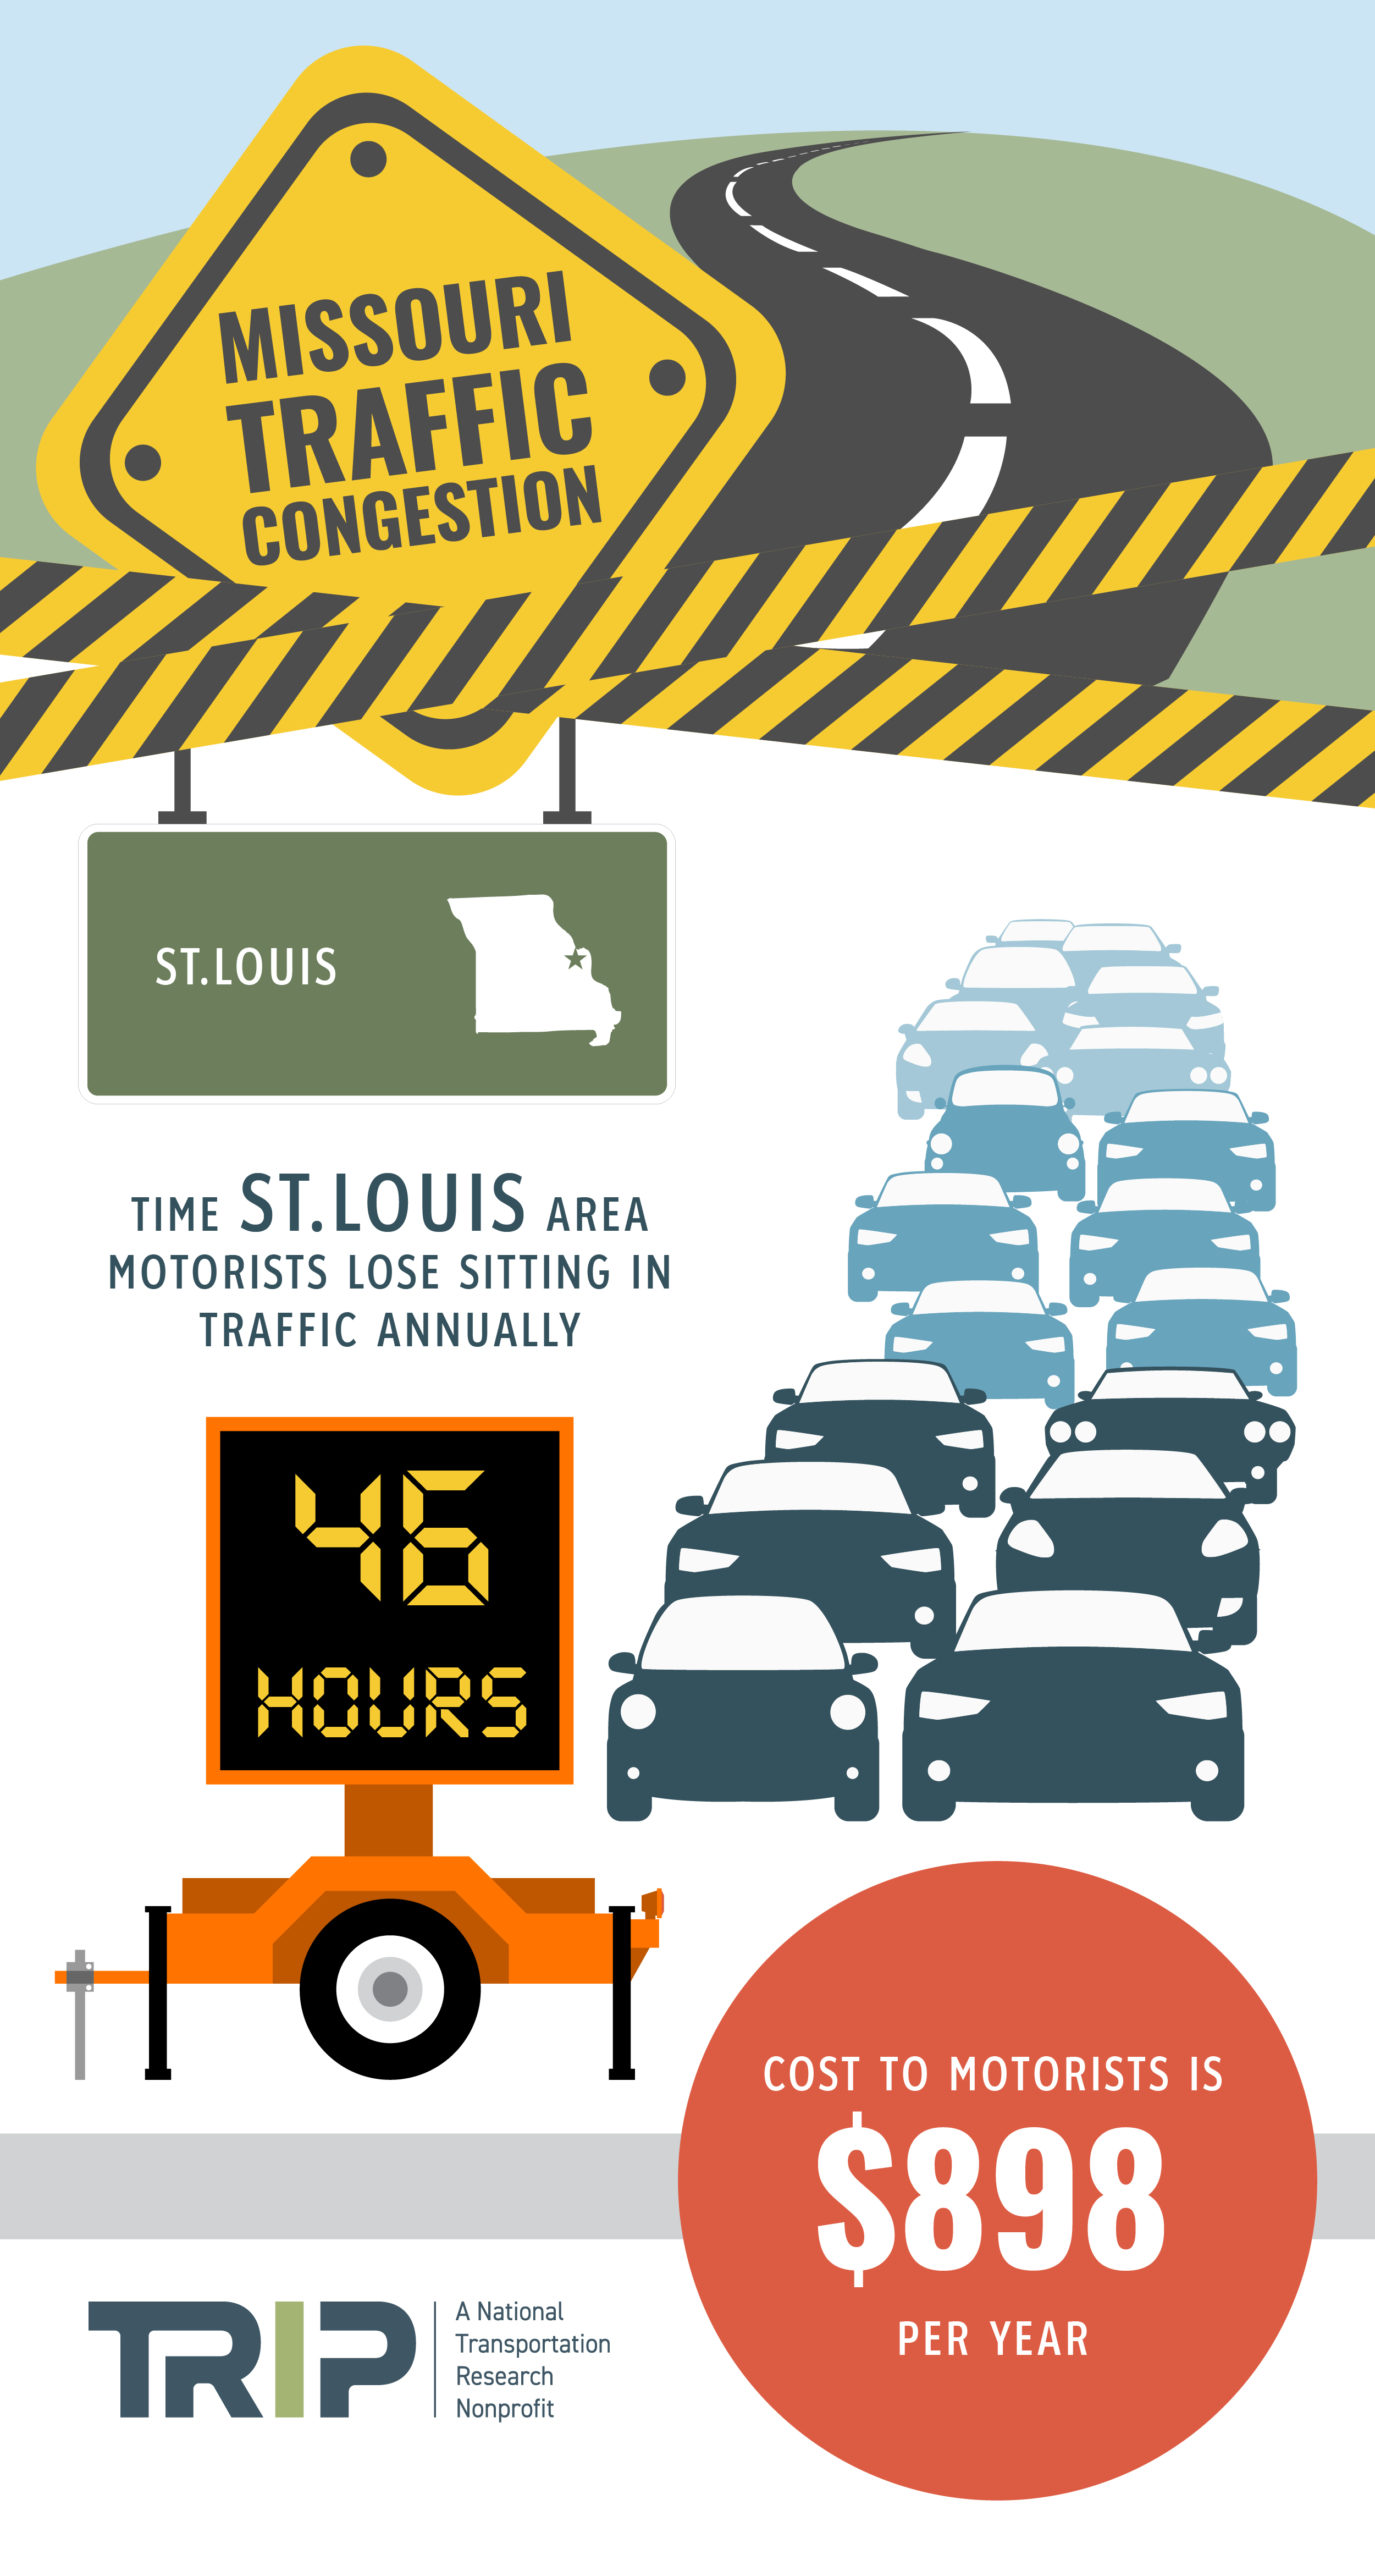 St. Louis Traffic Congestion Infographic – December 2020